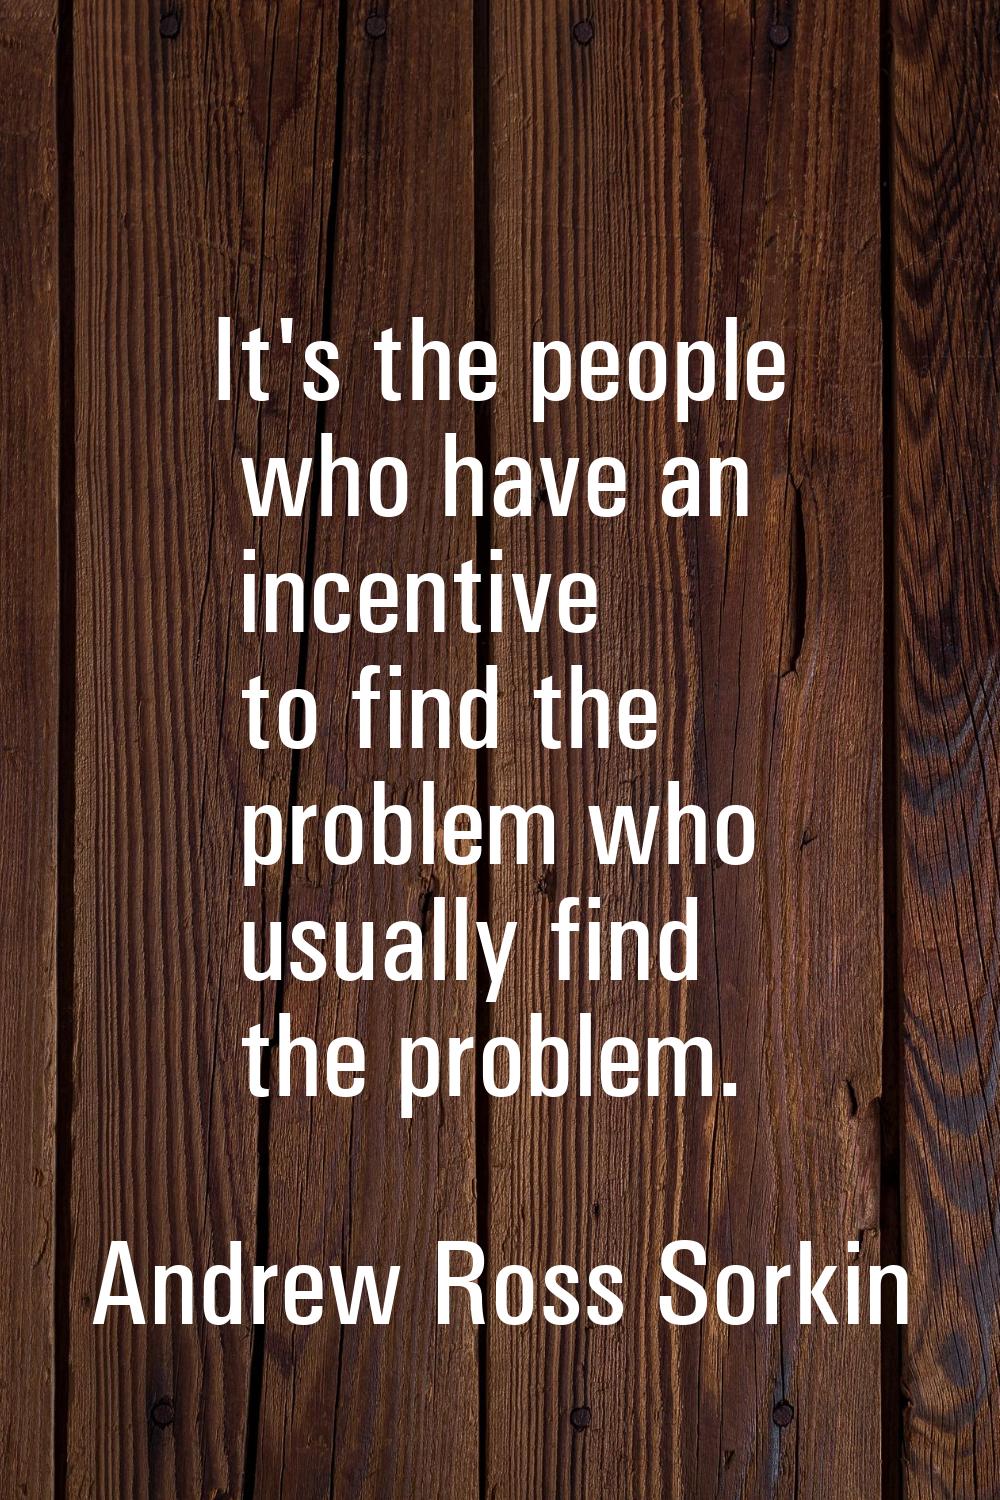 It's the people who have an incentive to find the problem who usually find the problem.